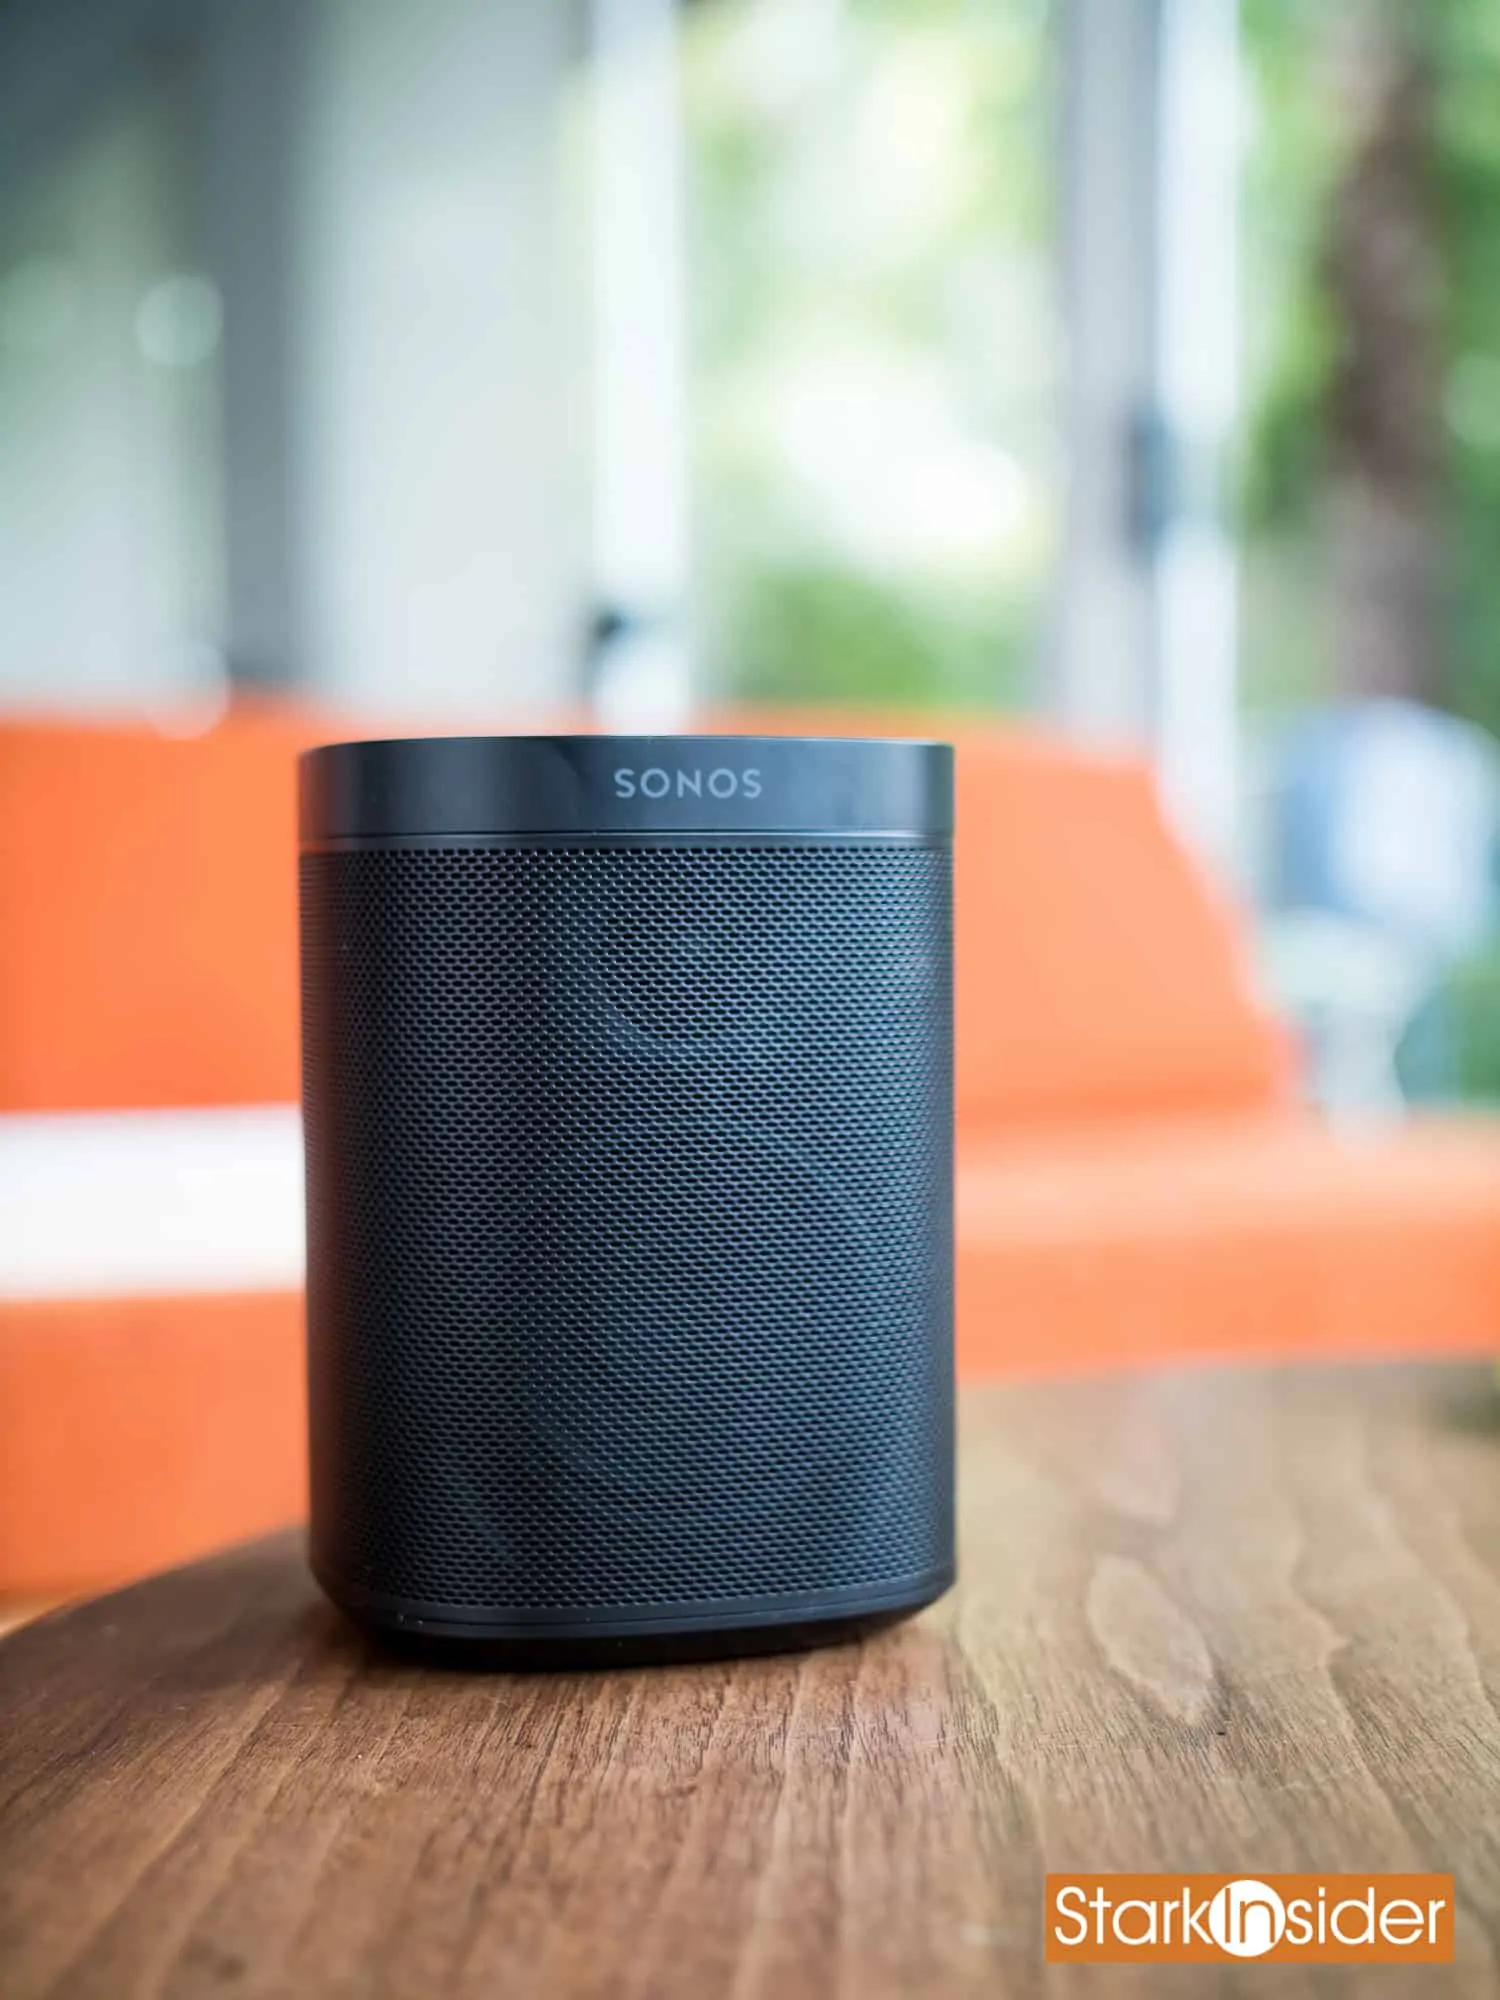 How to associate Sonos and Echo speakers with preferred speakers